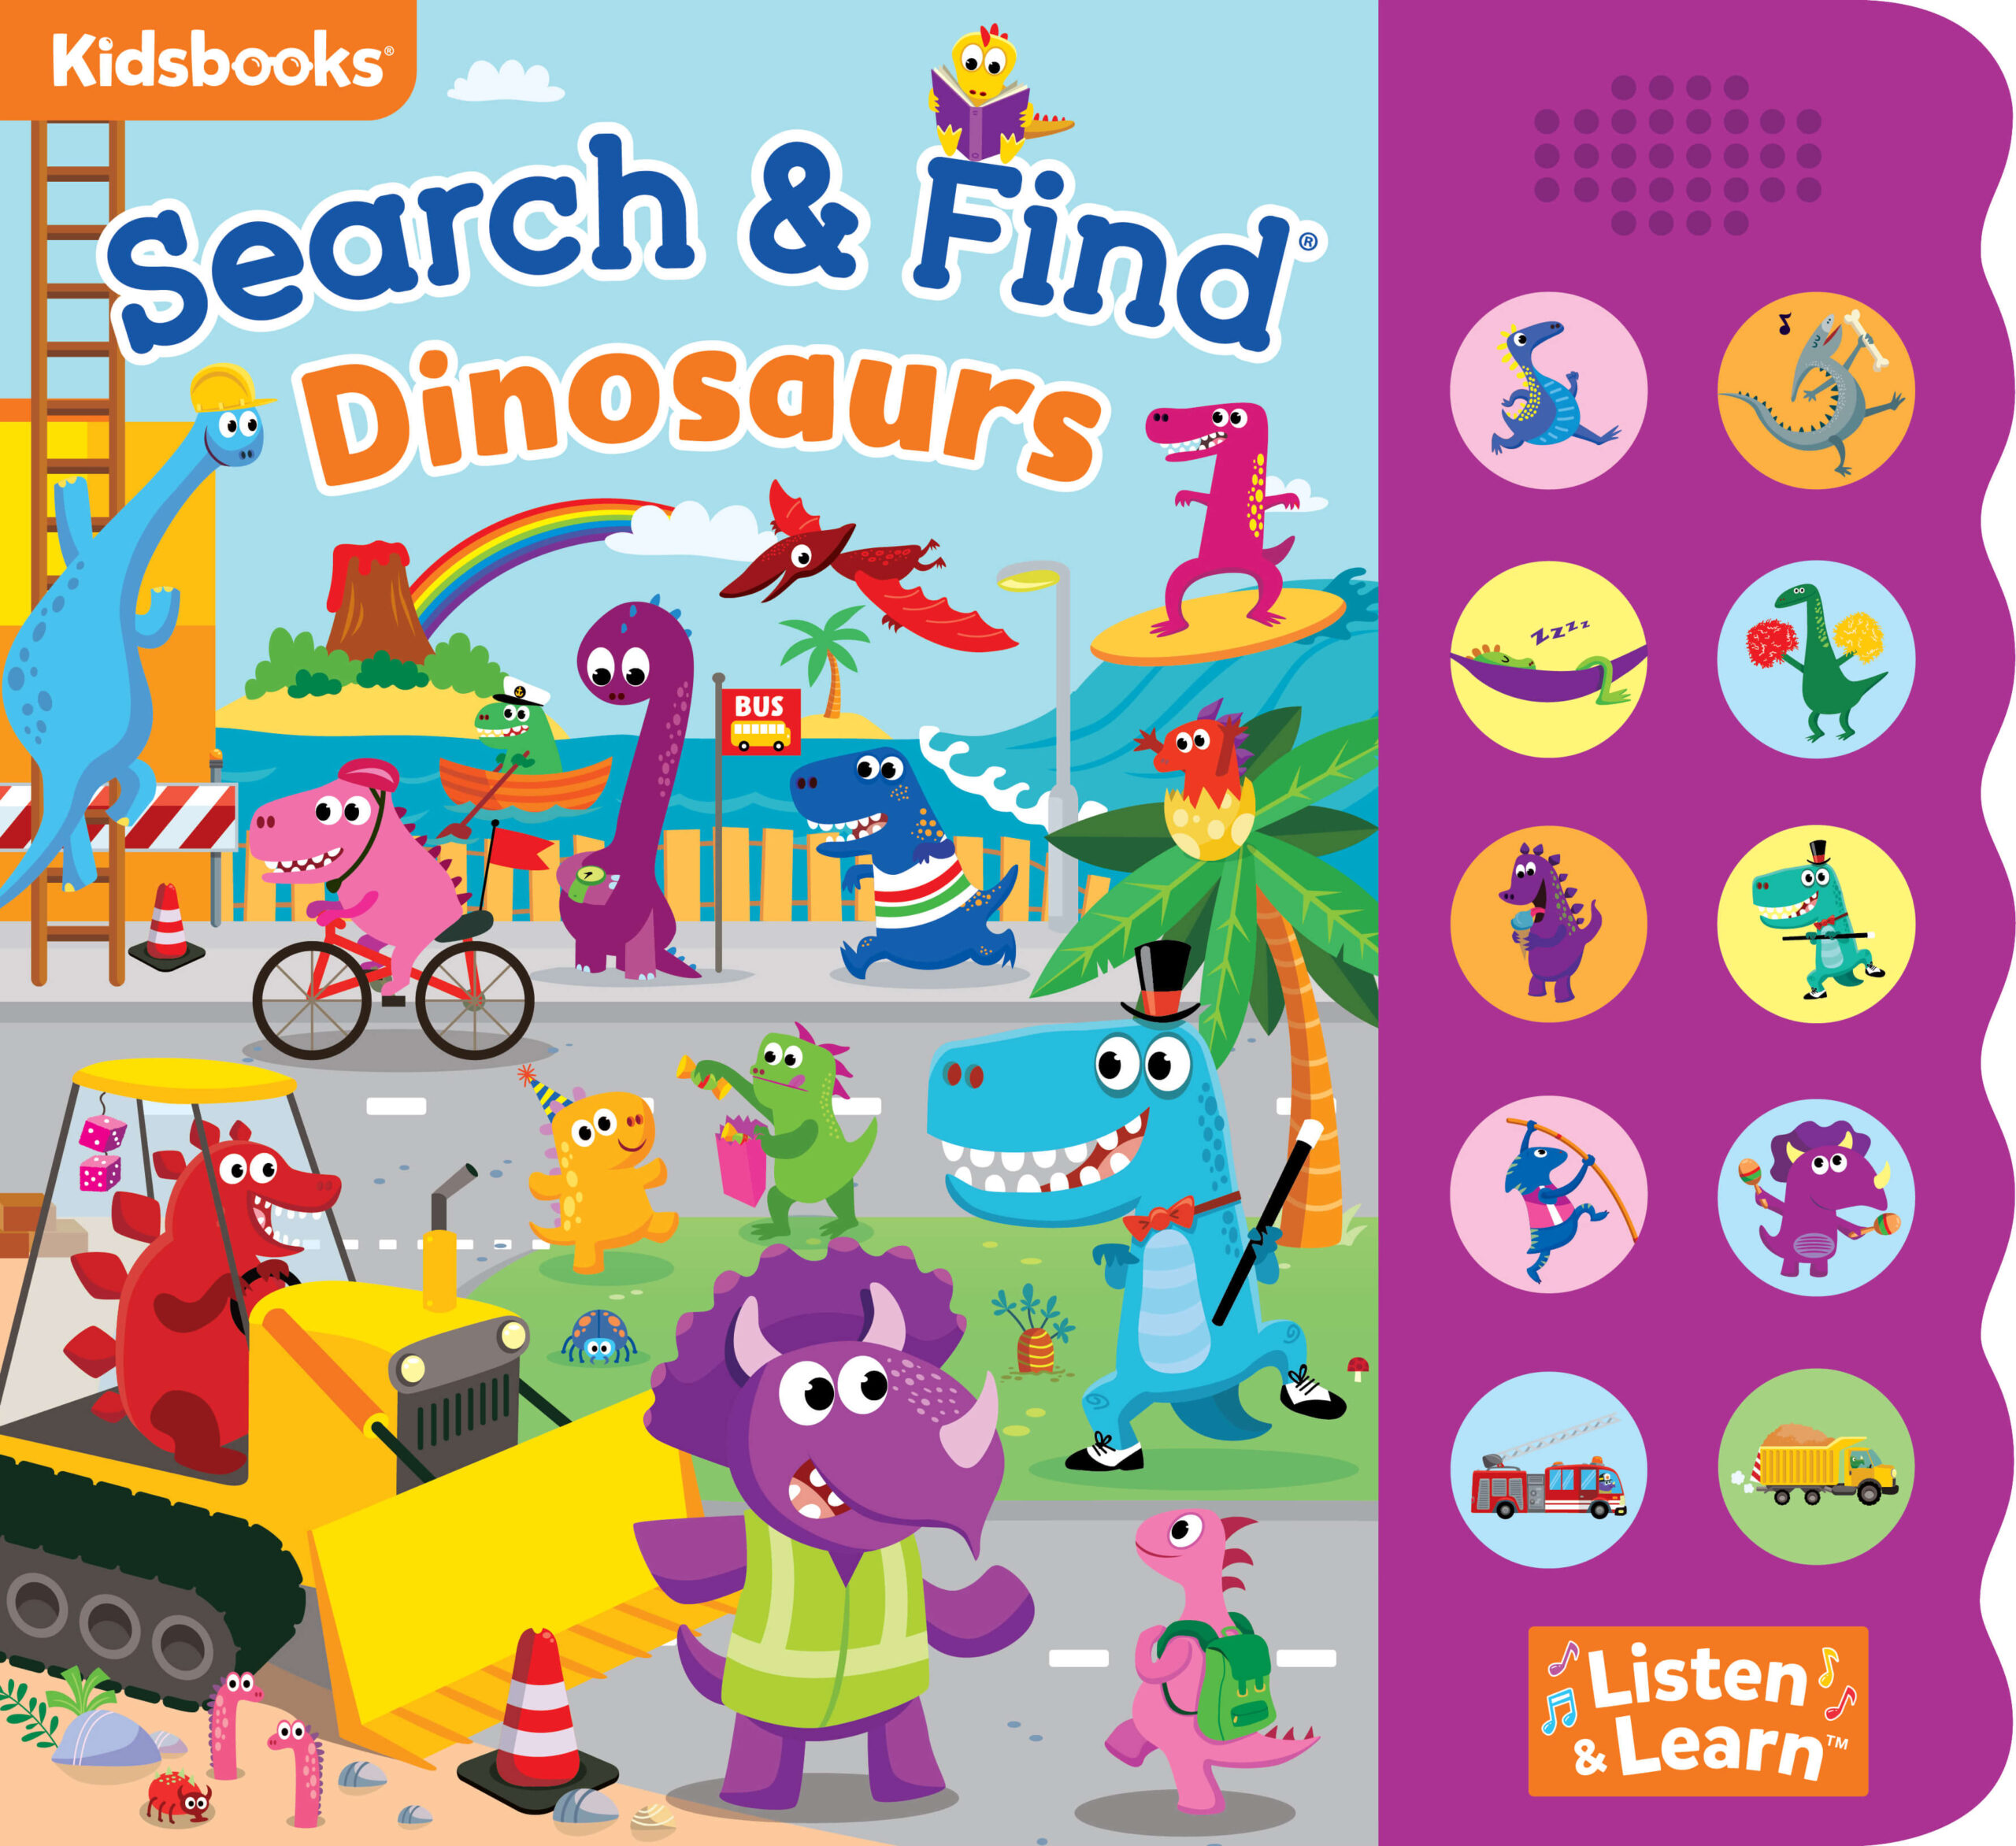 Search & Find: Dinosaurs